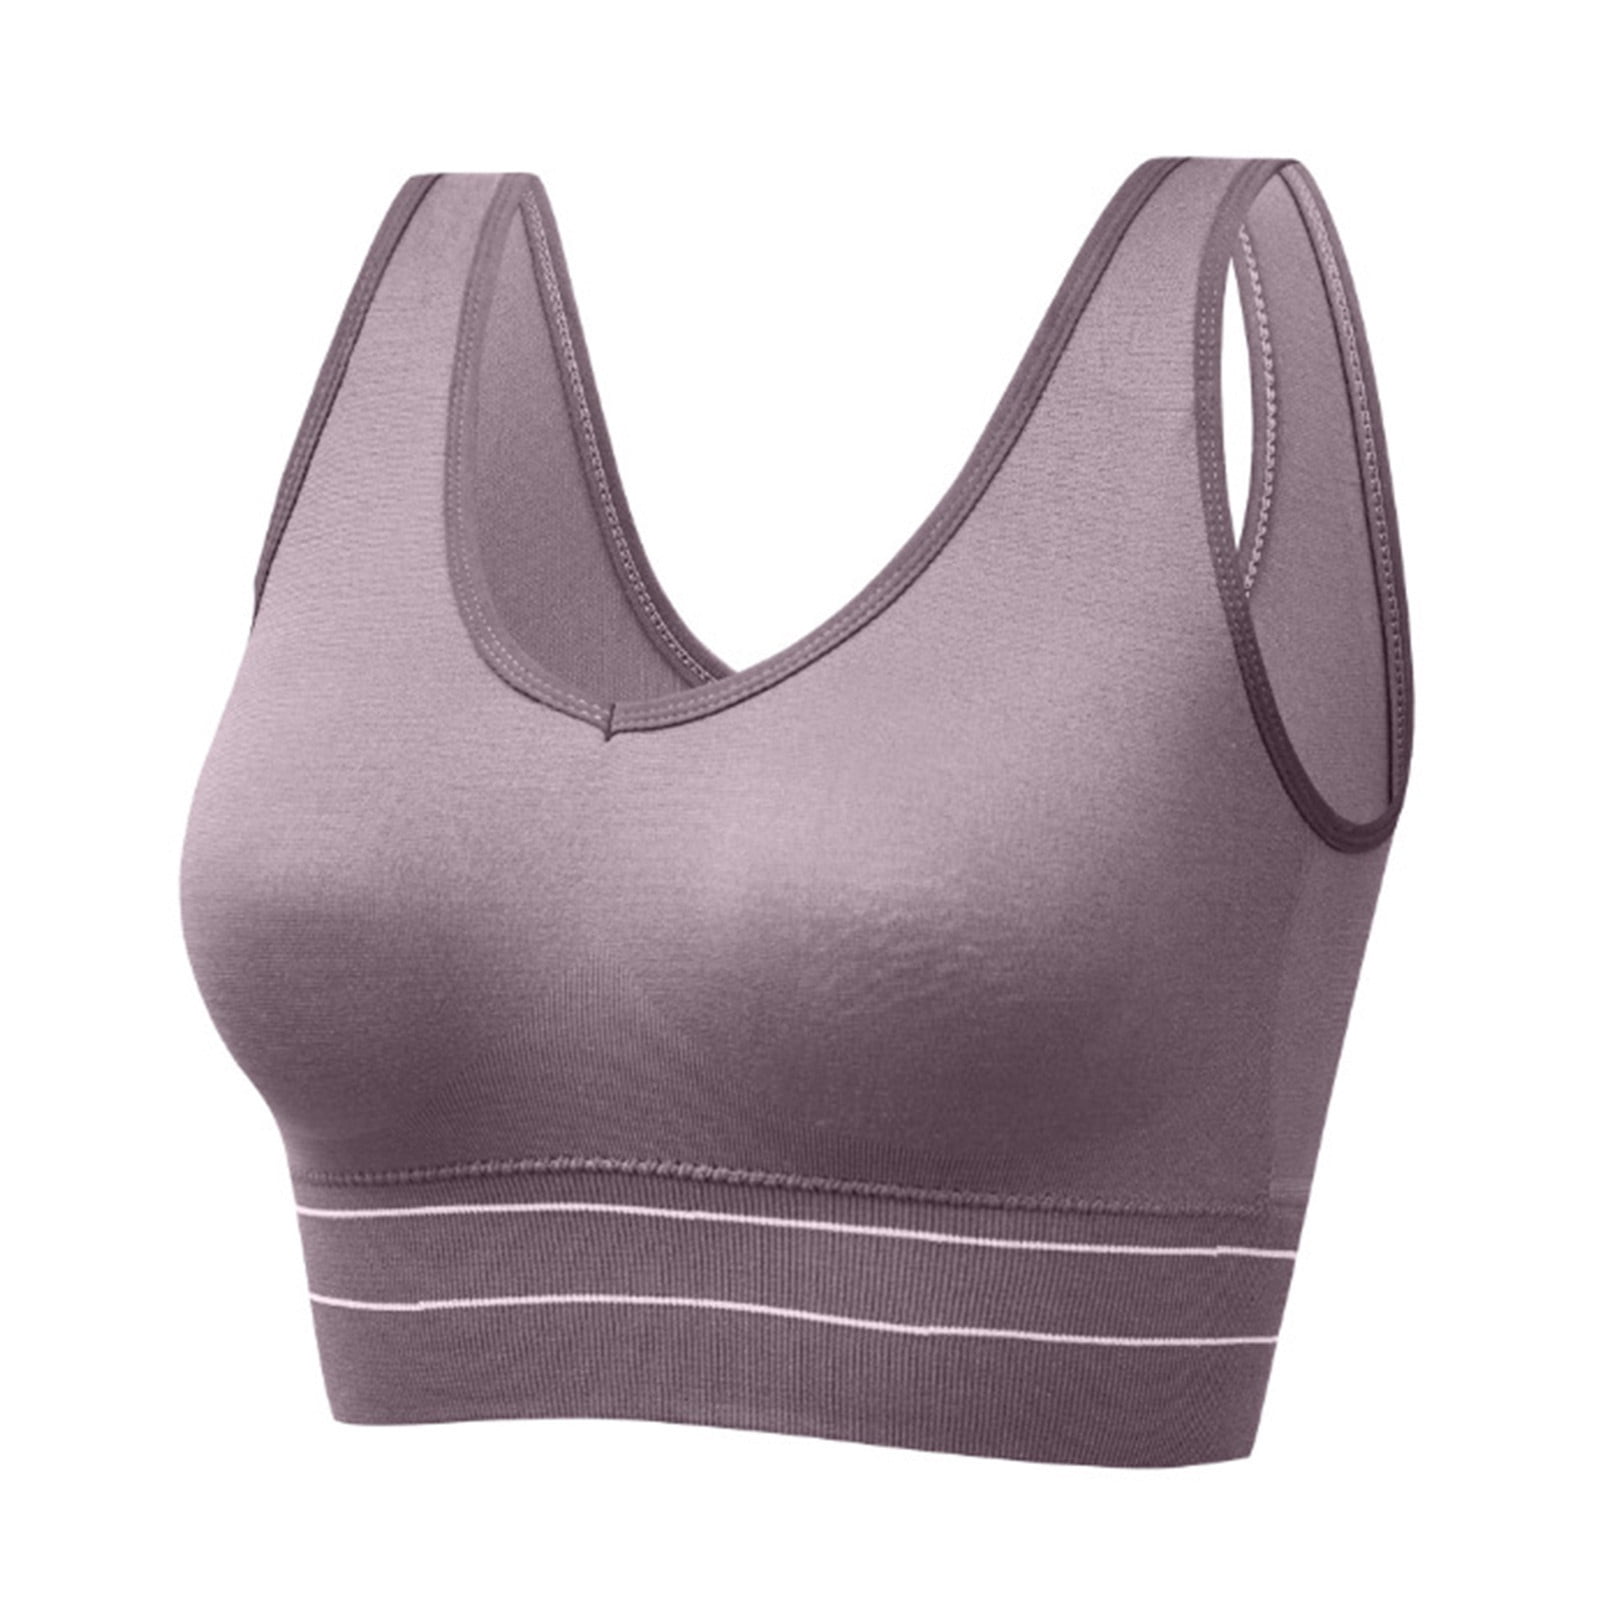 Darzheoy Sports Bras for Women Comfortable Cup Shockproof Sports Bra Large  Yoga Fitness Sports Bra 85-95/39-42ABCD 